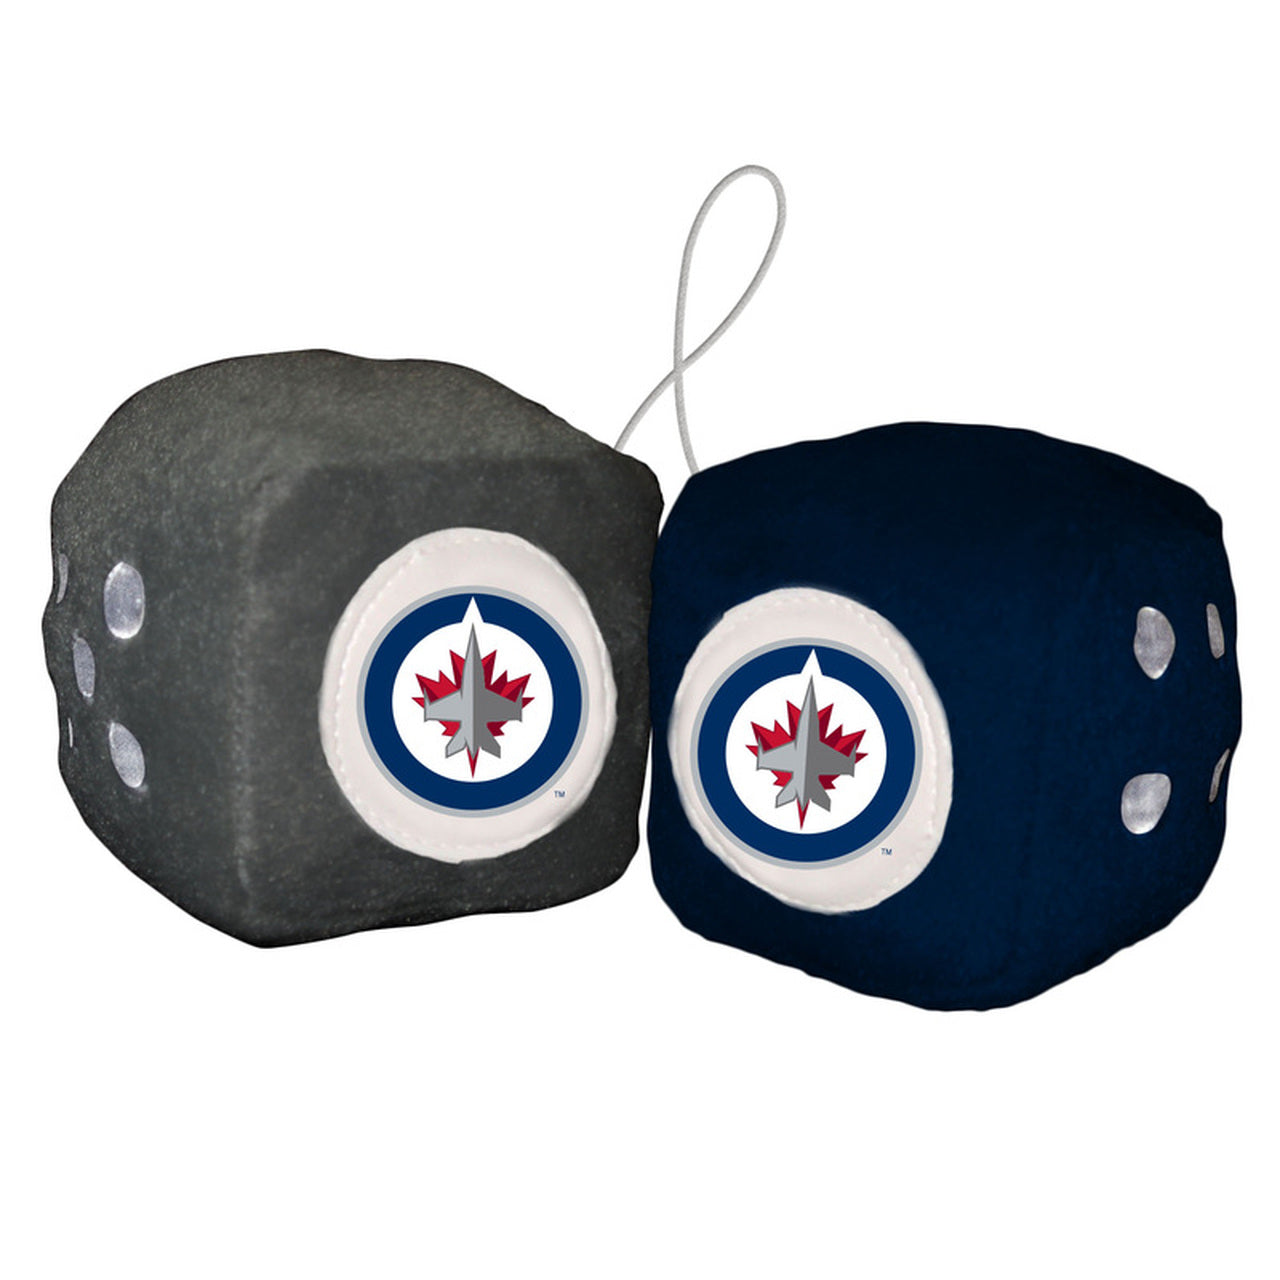 Winnipeg Jets NHL Plush Dice - 3" team-colored, logo dice. High-quality plush. Official NHL licensed. By Fremont Die.